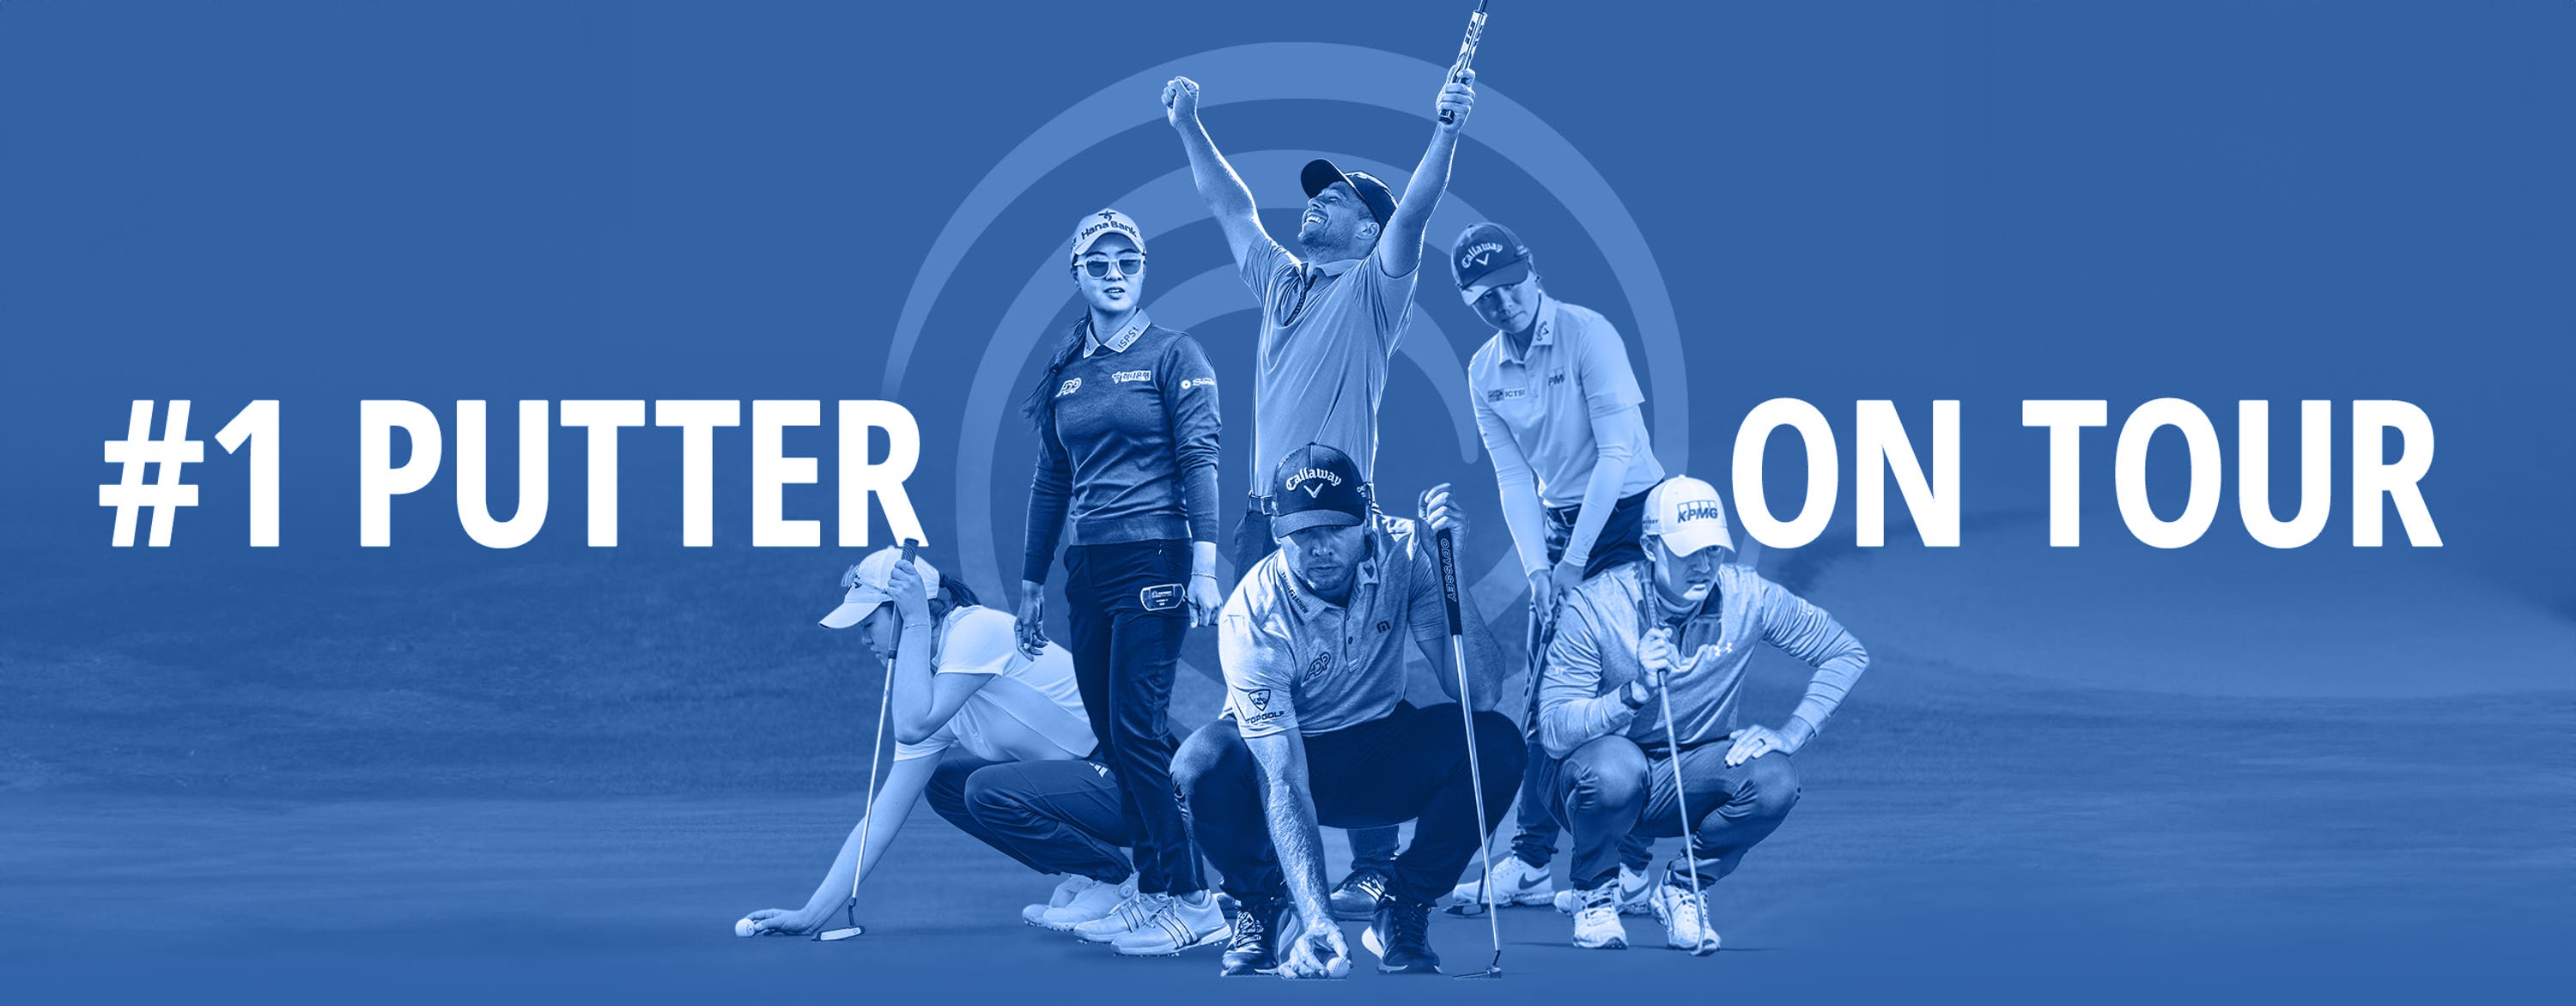 odyssey golf staff players in a montage with blue colored background